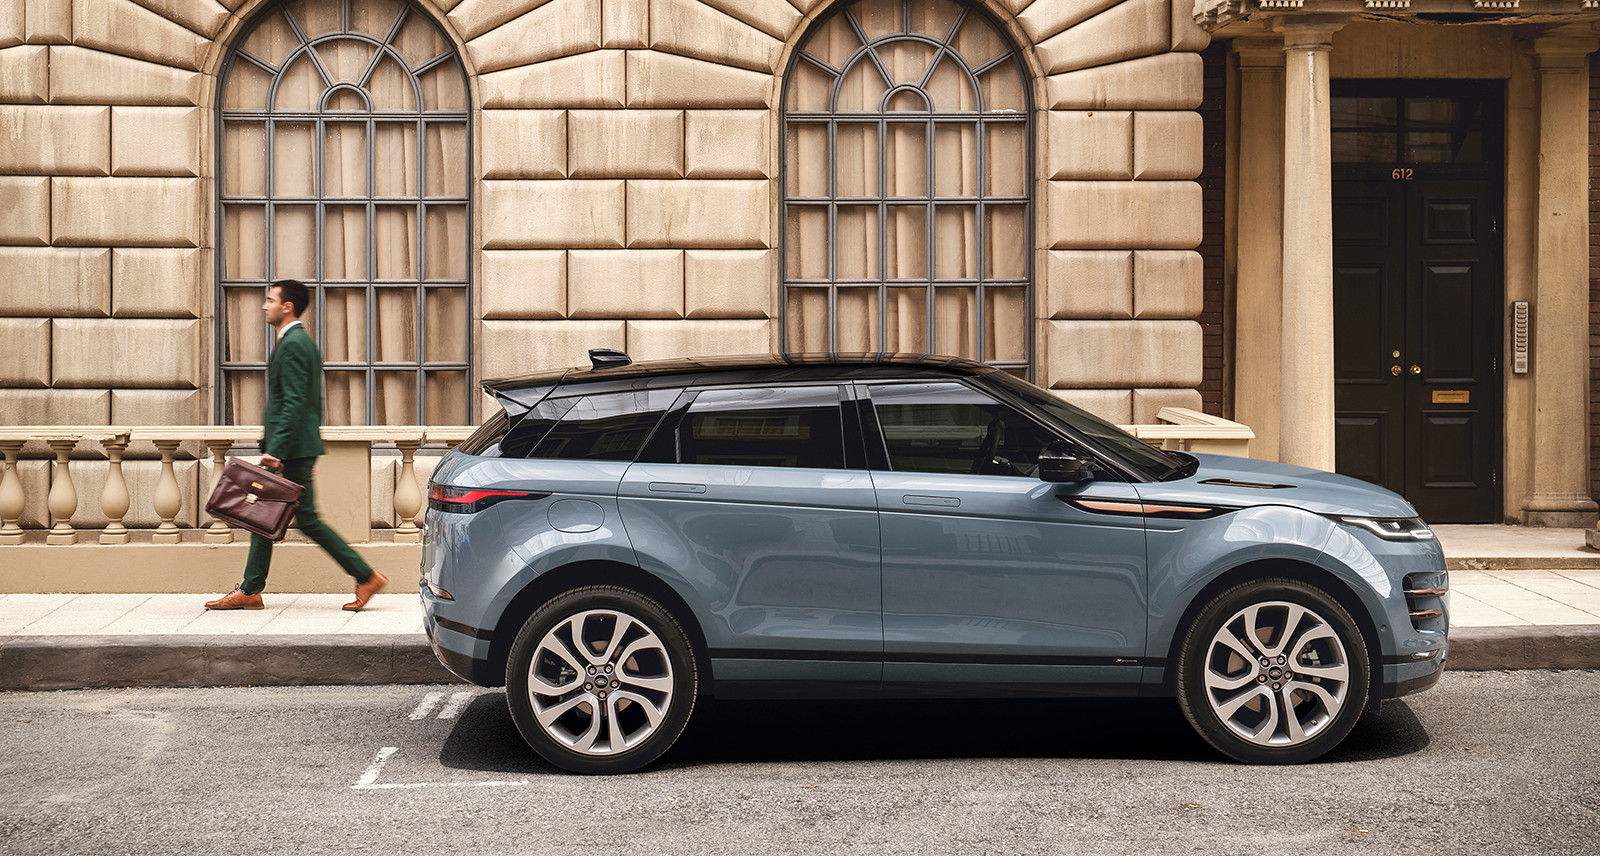 The New Evoque Isn’t the Same as the Old Evoque